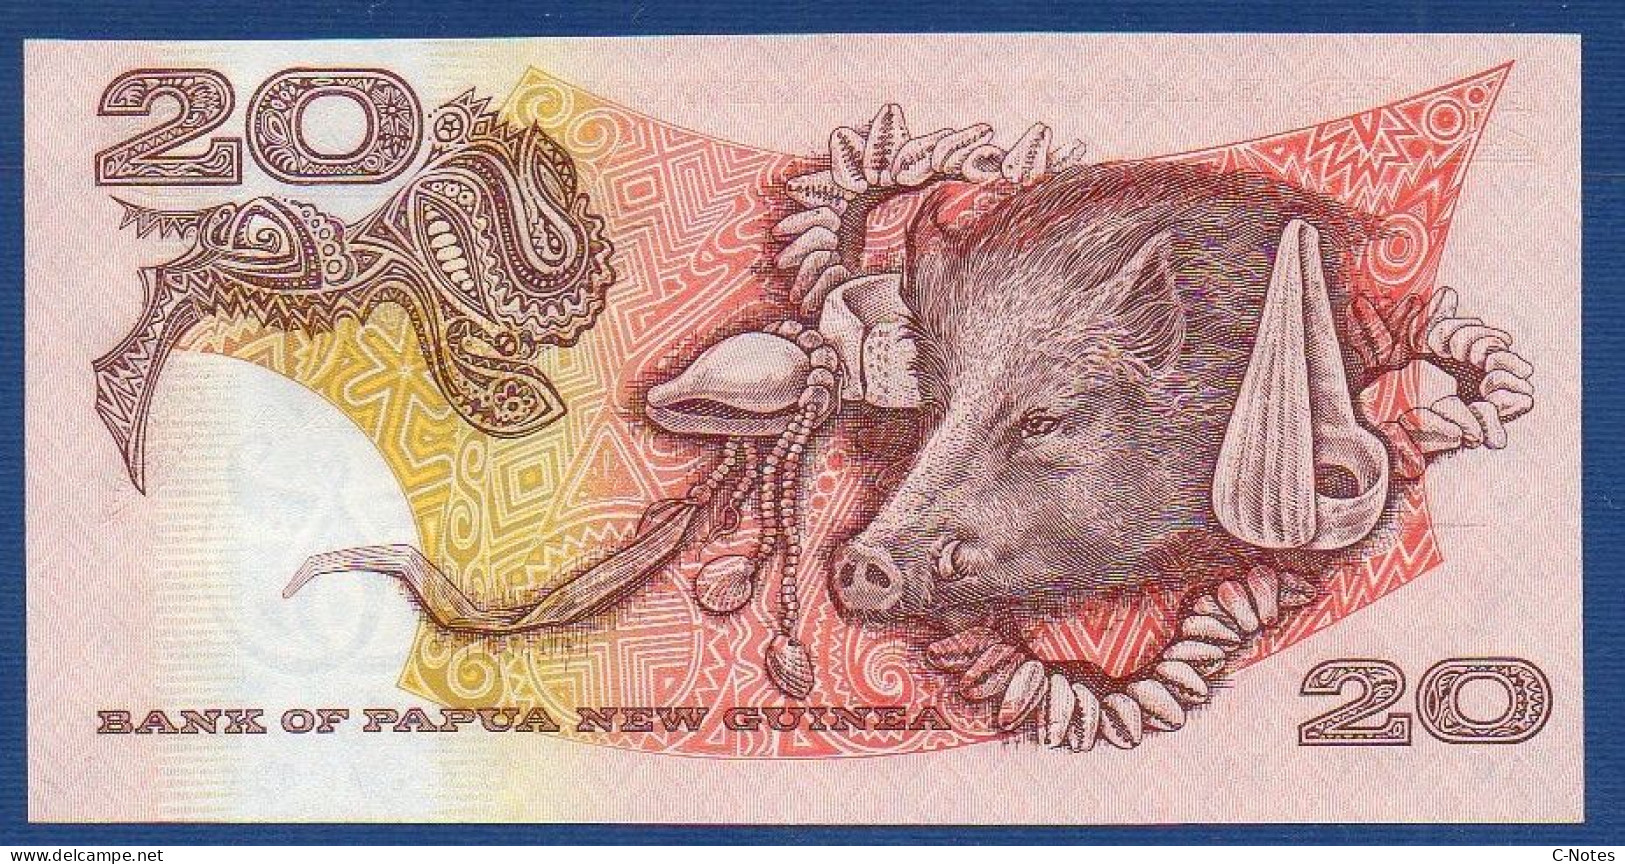 PAPUA NEW GUINEA - P.24 – 20 KINA ND (2000) UNC, Serie AG00040138 -Silver Jubilee Papua New Guinea" Commemorative Issue - Papouasie-Nouvelle-Guinée